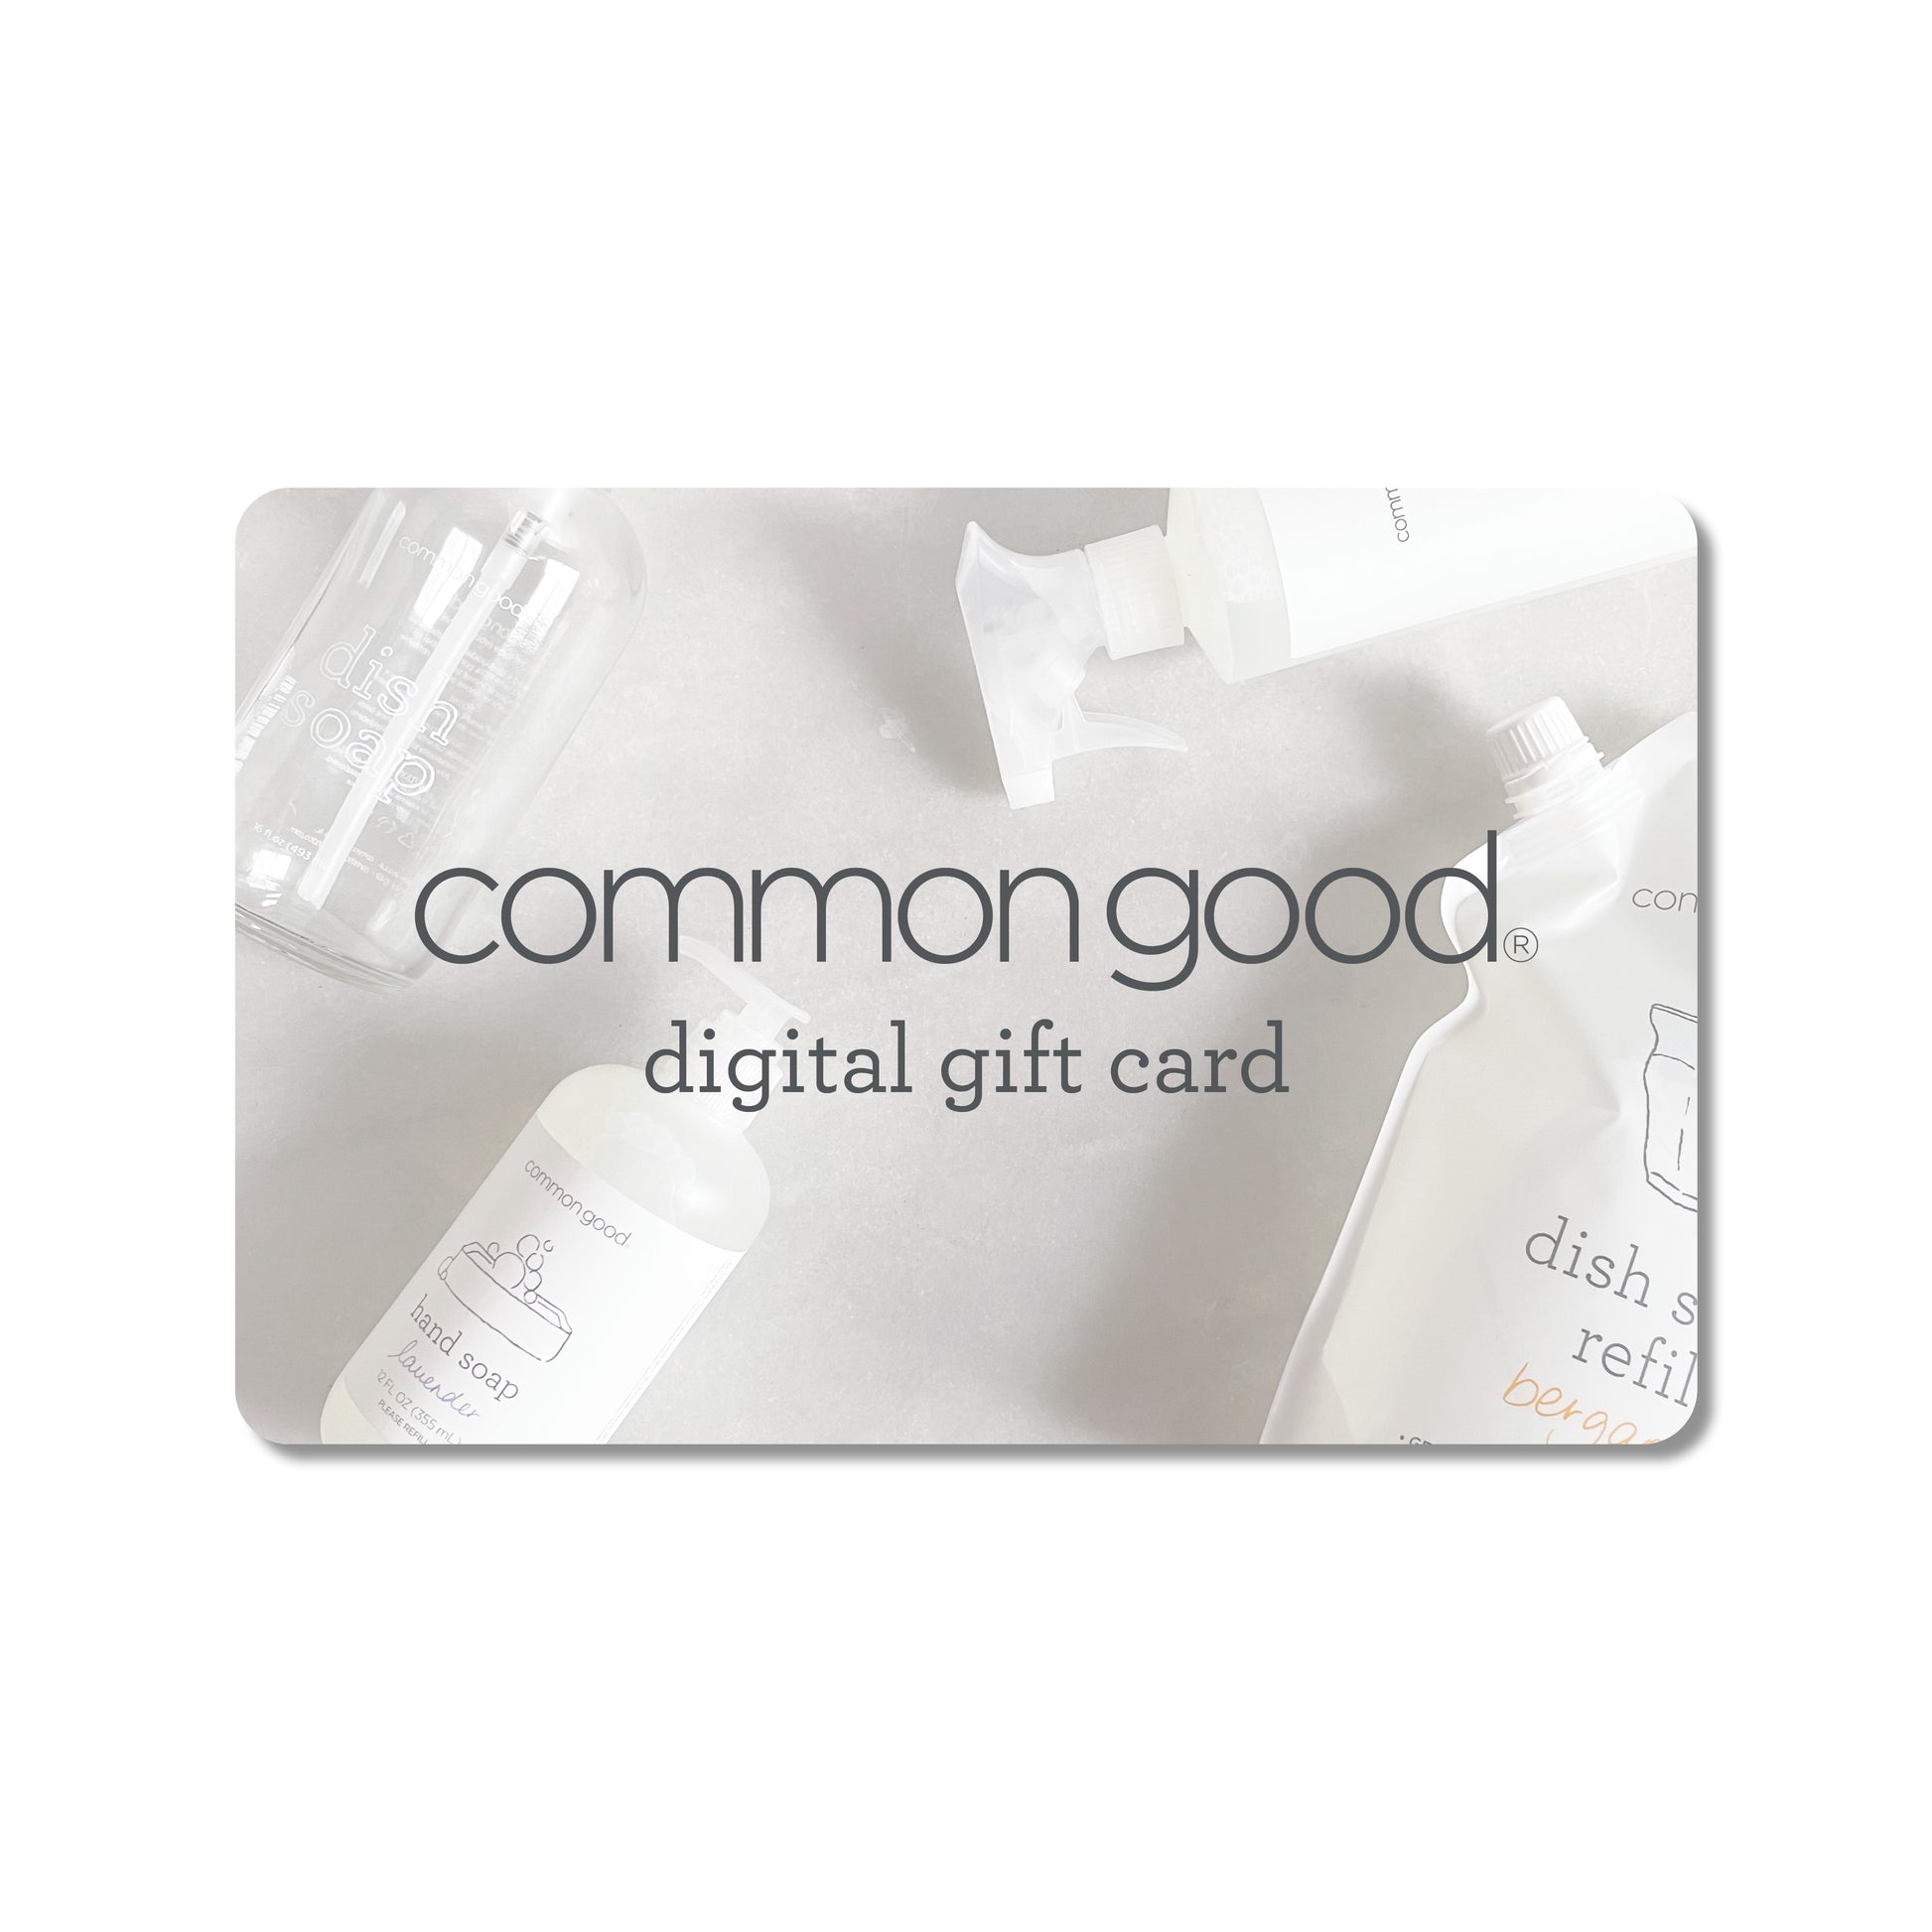 Give a Digital Gift Card– Common Good